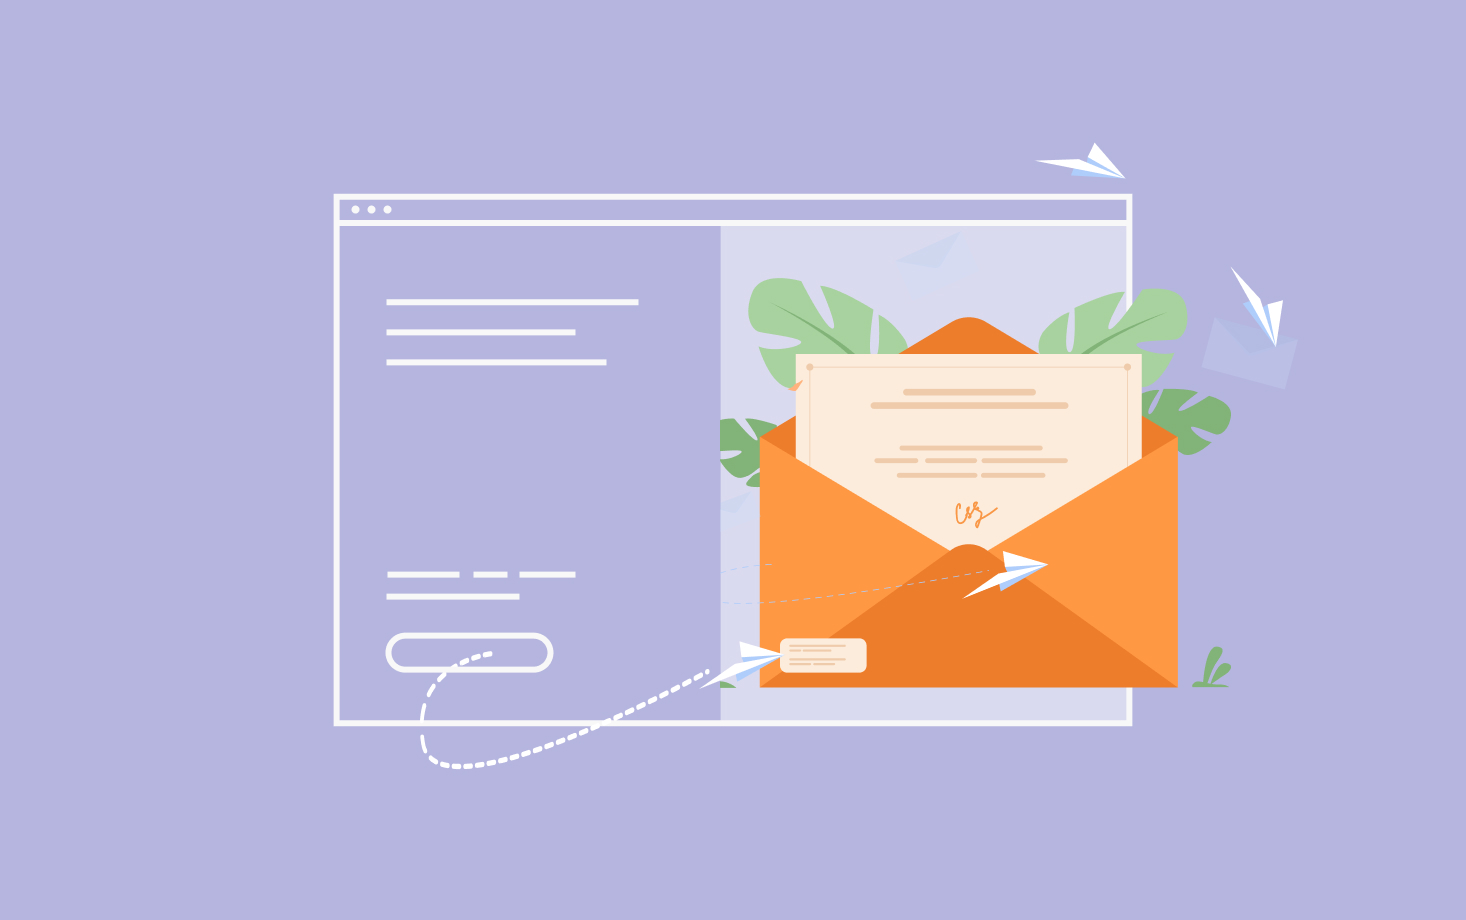 How to Get More Subscribers to your Mailing List